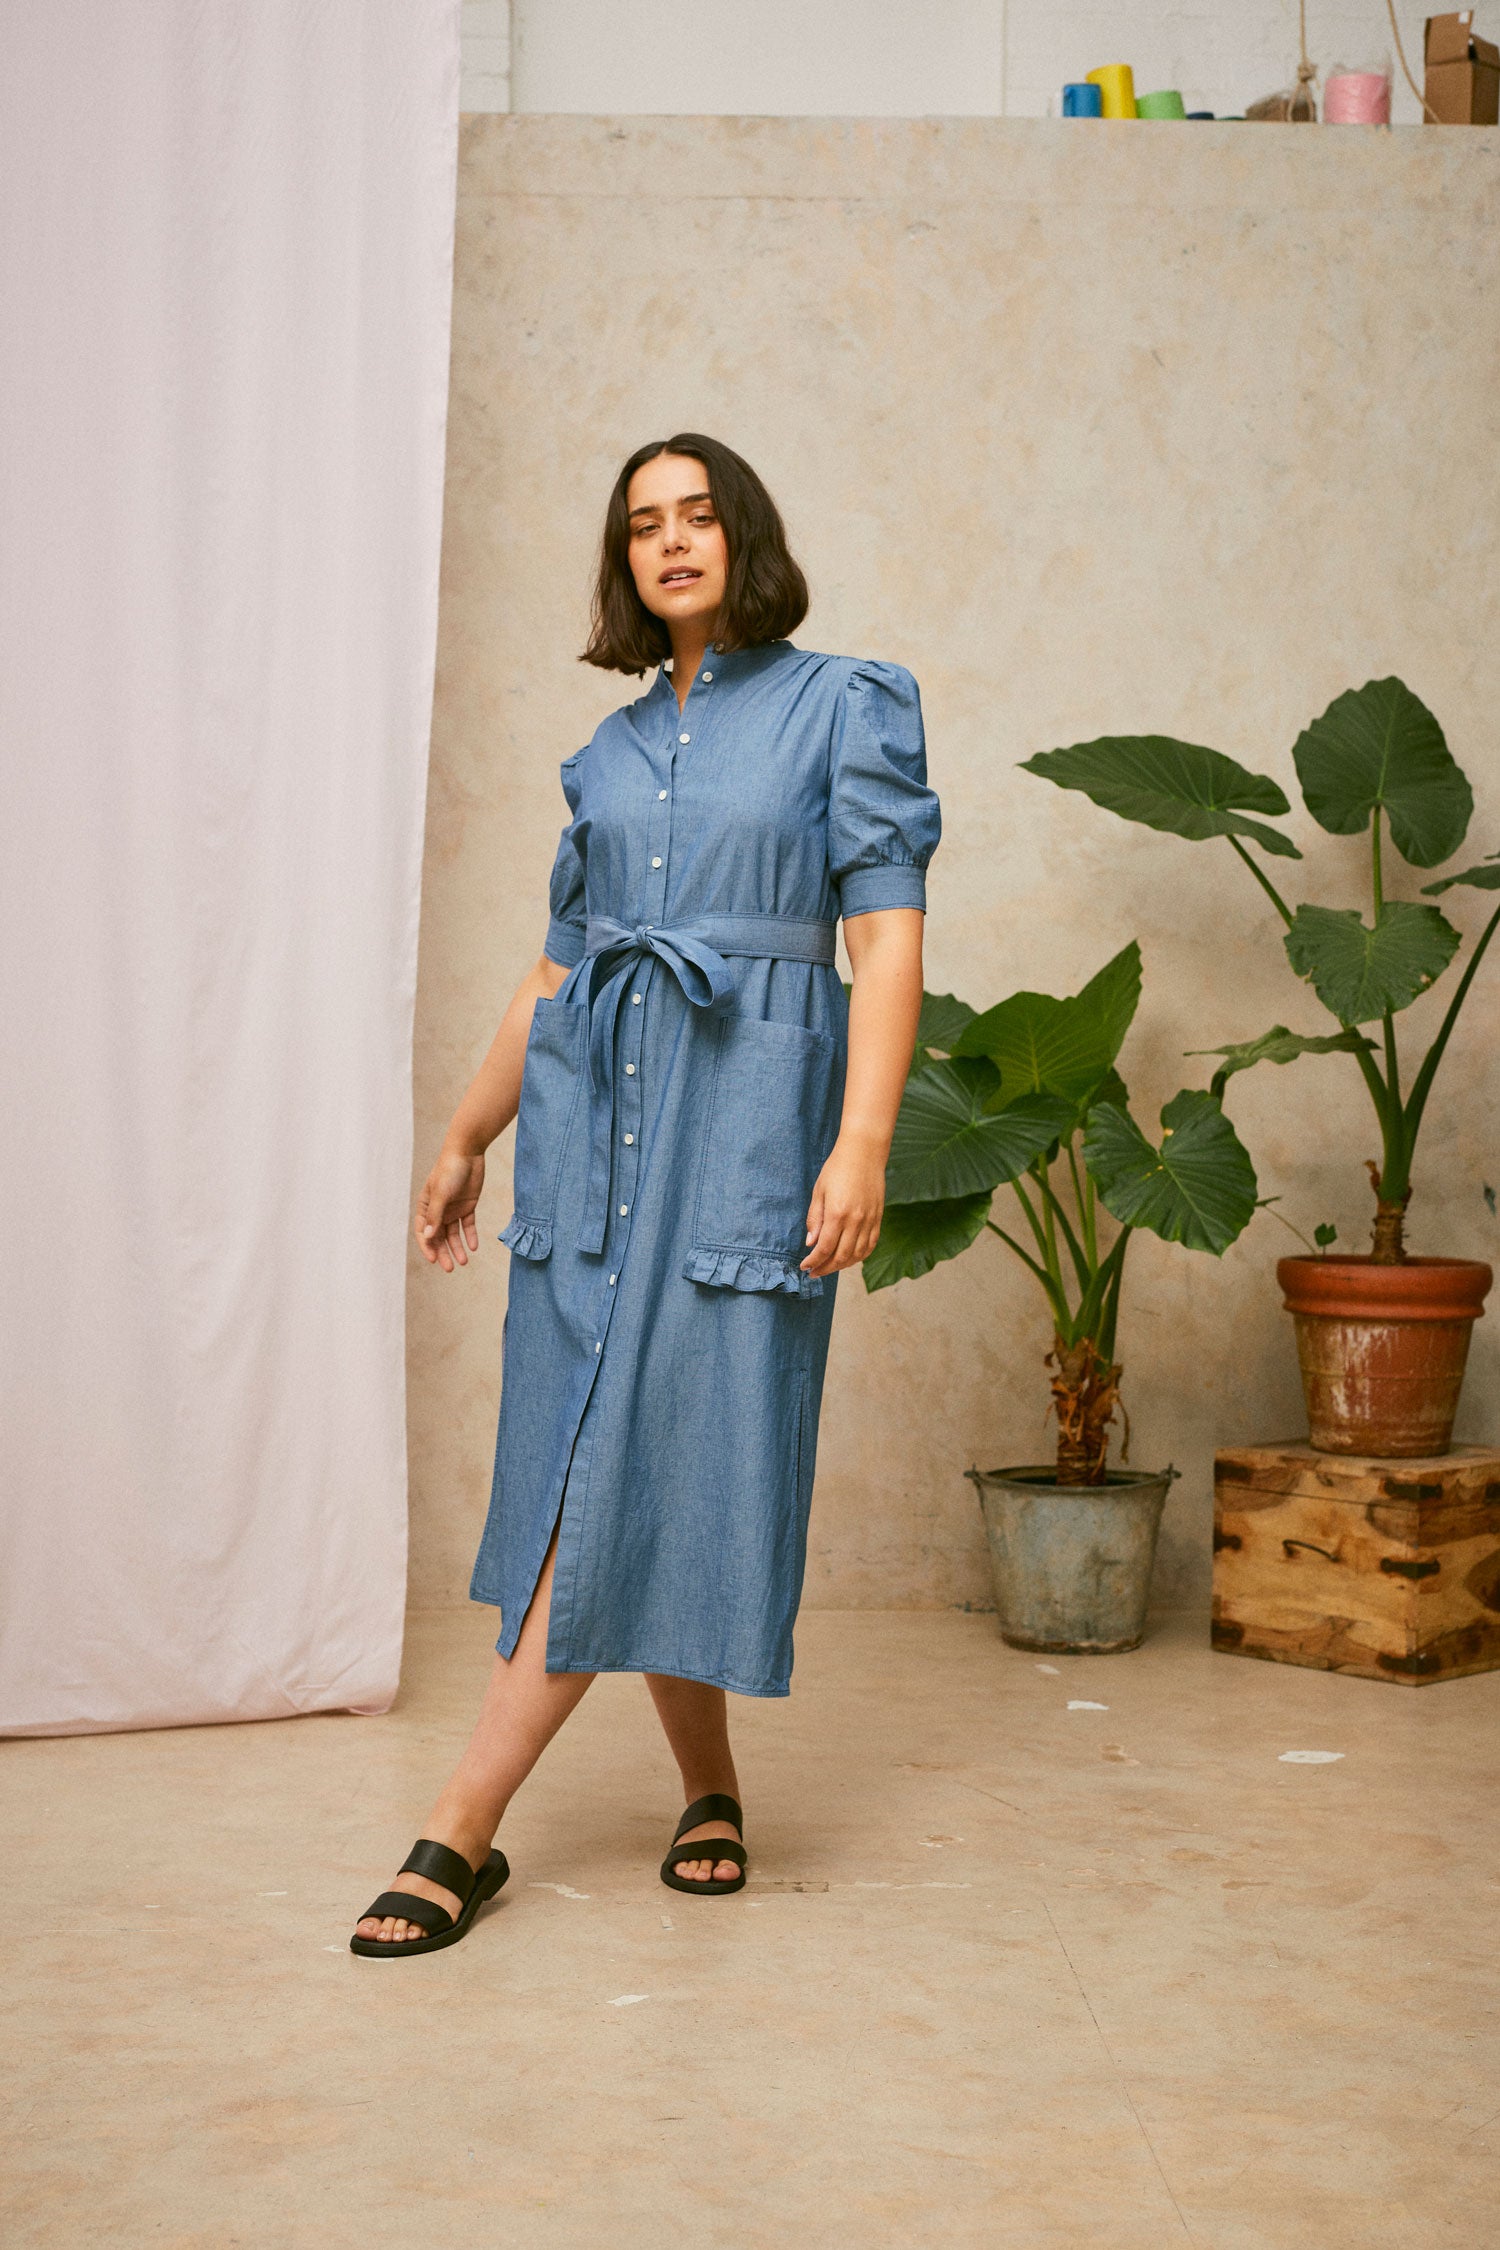 Full length shot of model wearing Saywood's Rosa denim shirtdress in light wash Japanese denim; a long line style with patch pockets and ruffles, a belt tied round the waist. Worn with black sandals. A plant and drop of pink fabric can be seen in the background.